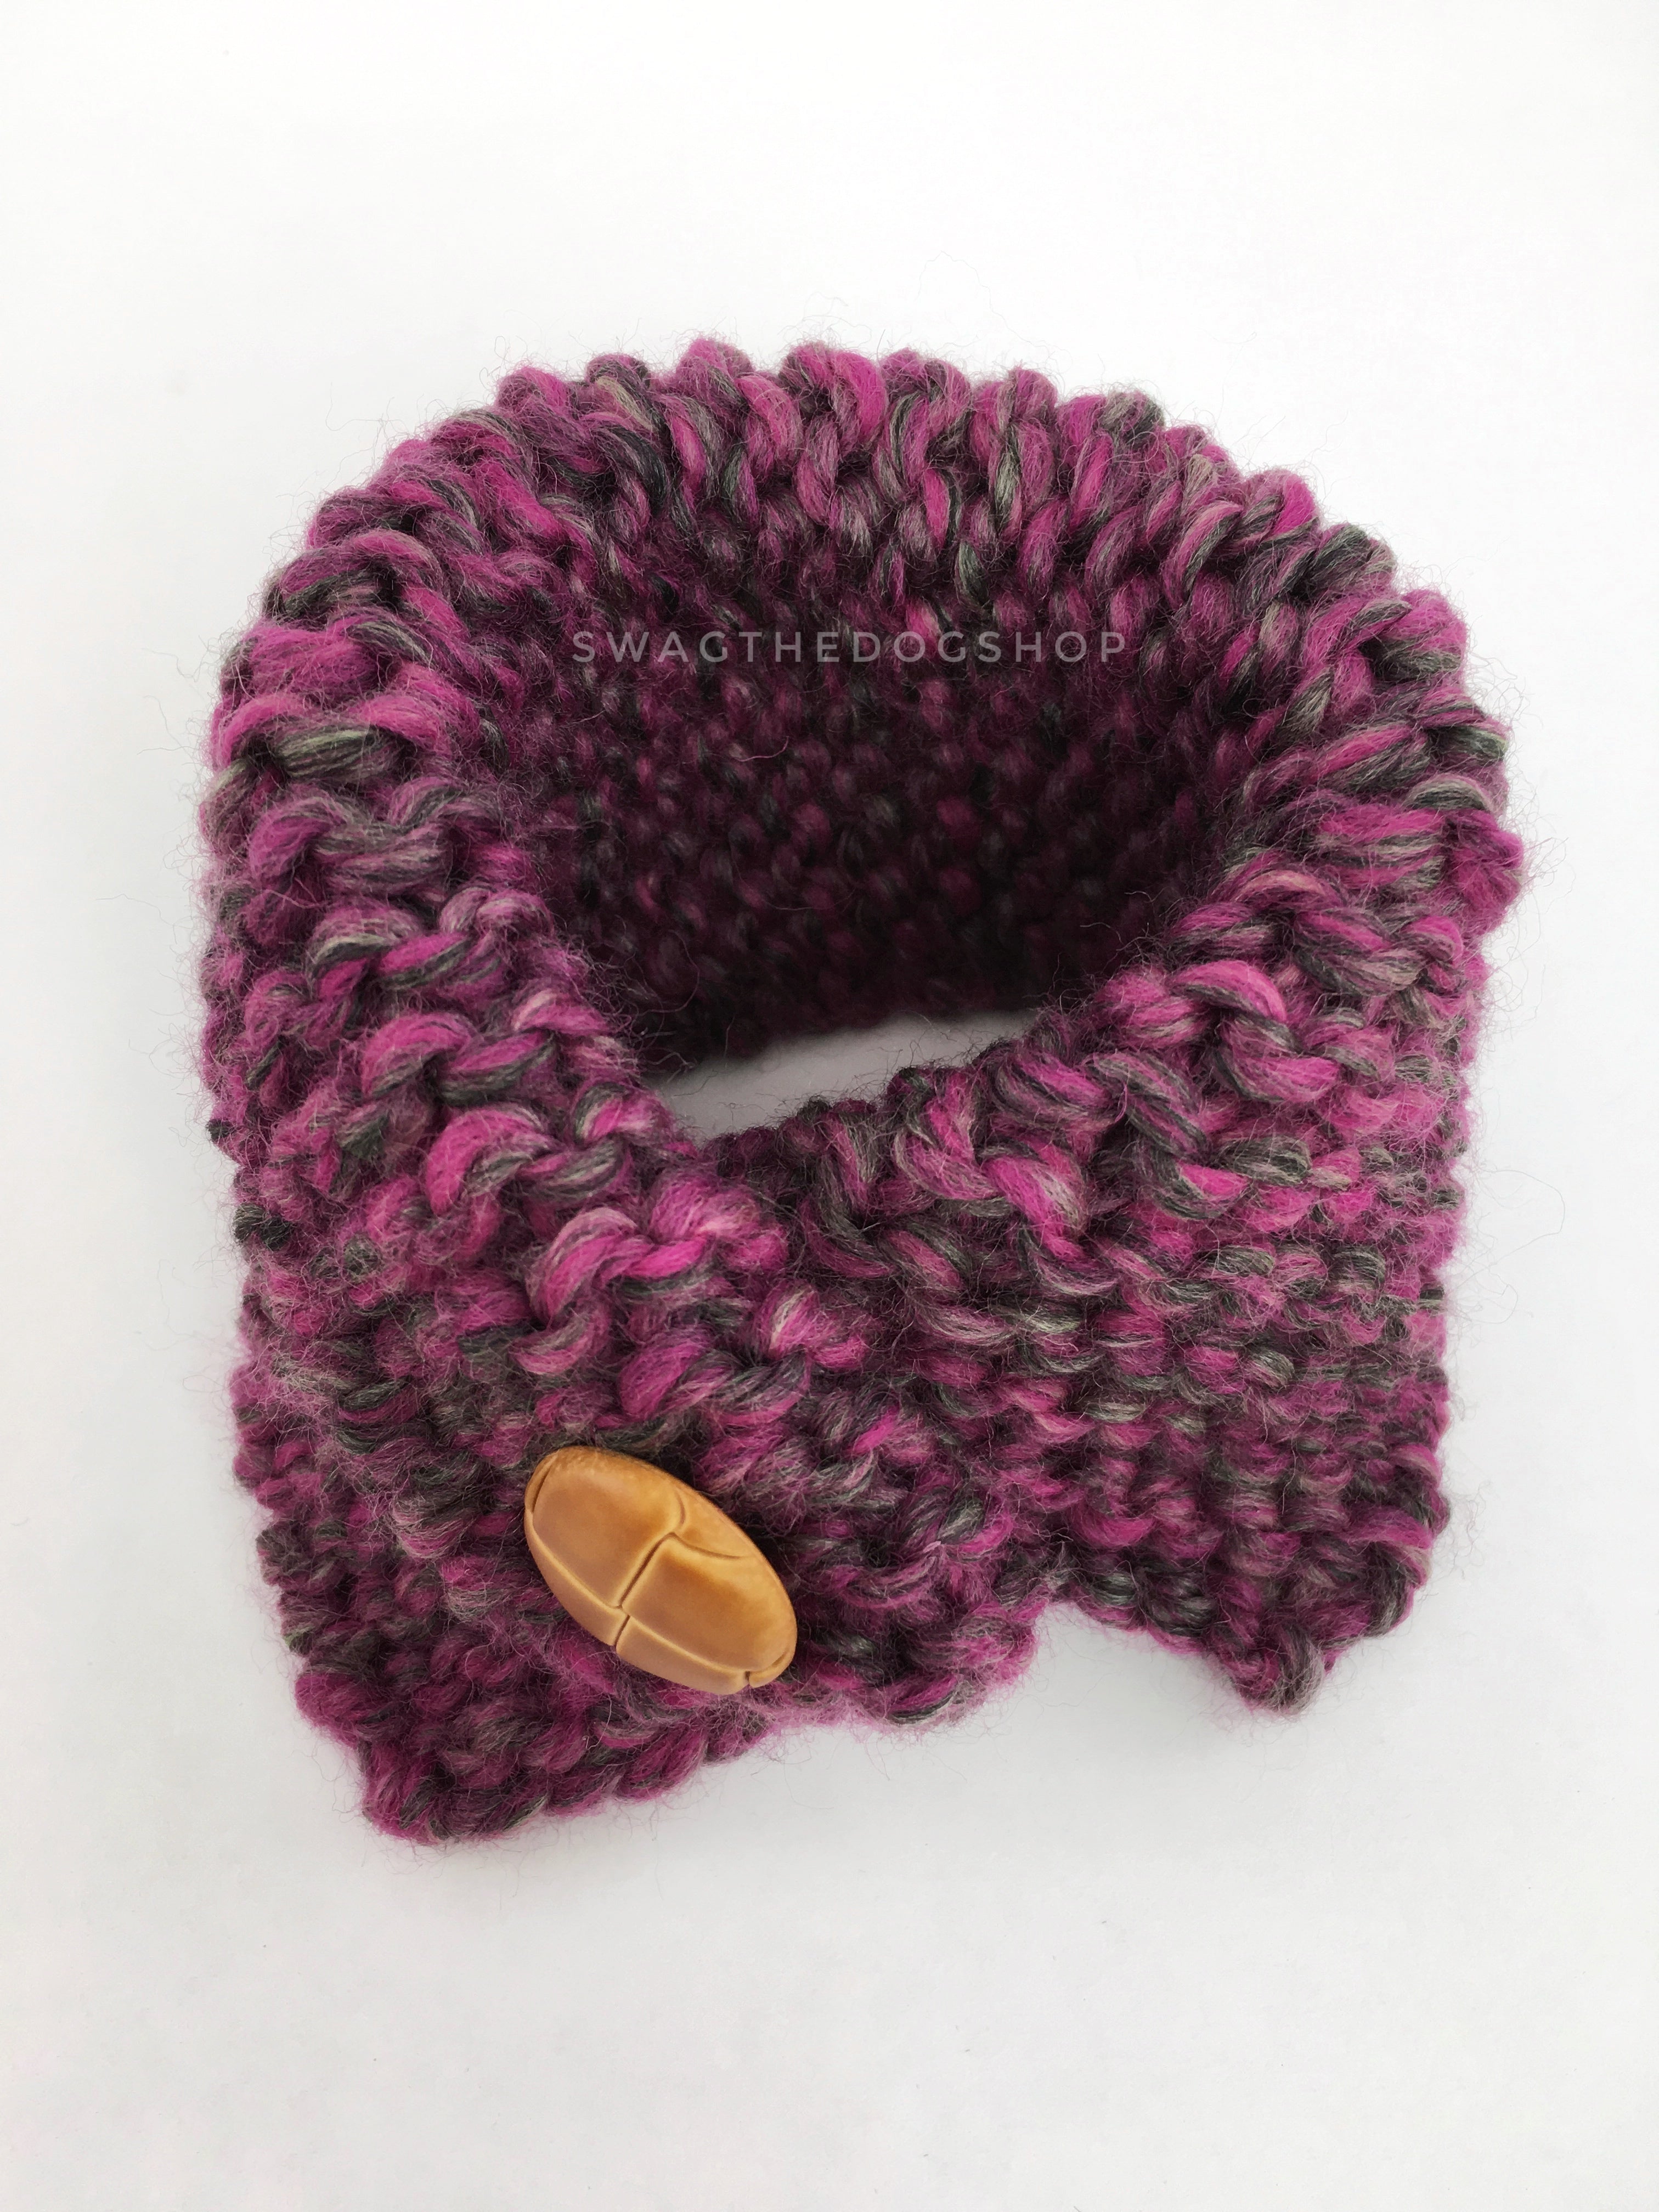 Berries Swagsnood - Product Above View. Pink Gray Mixed Color Dog Snood with Accent Button